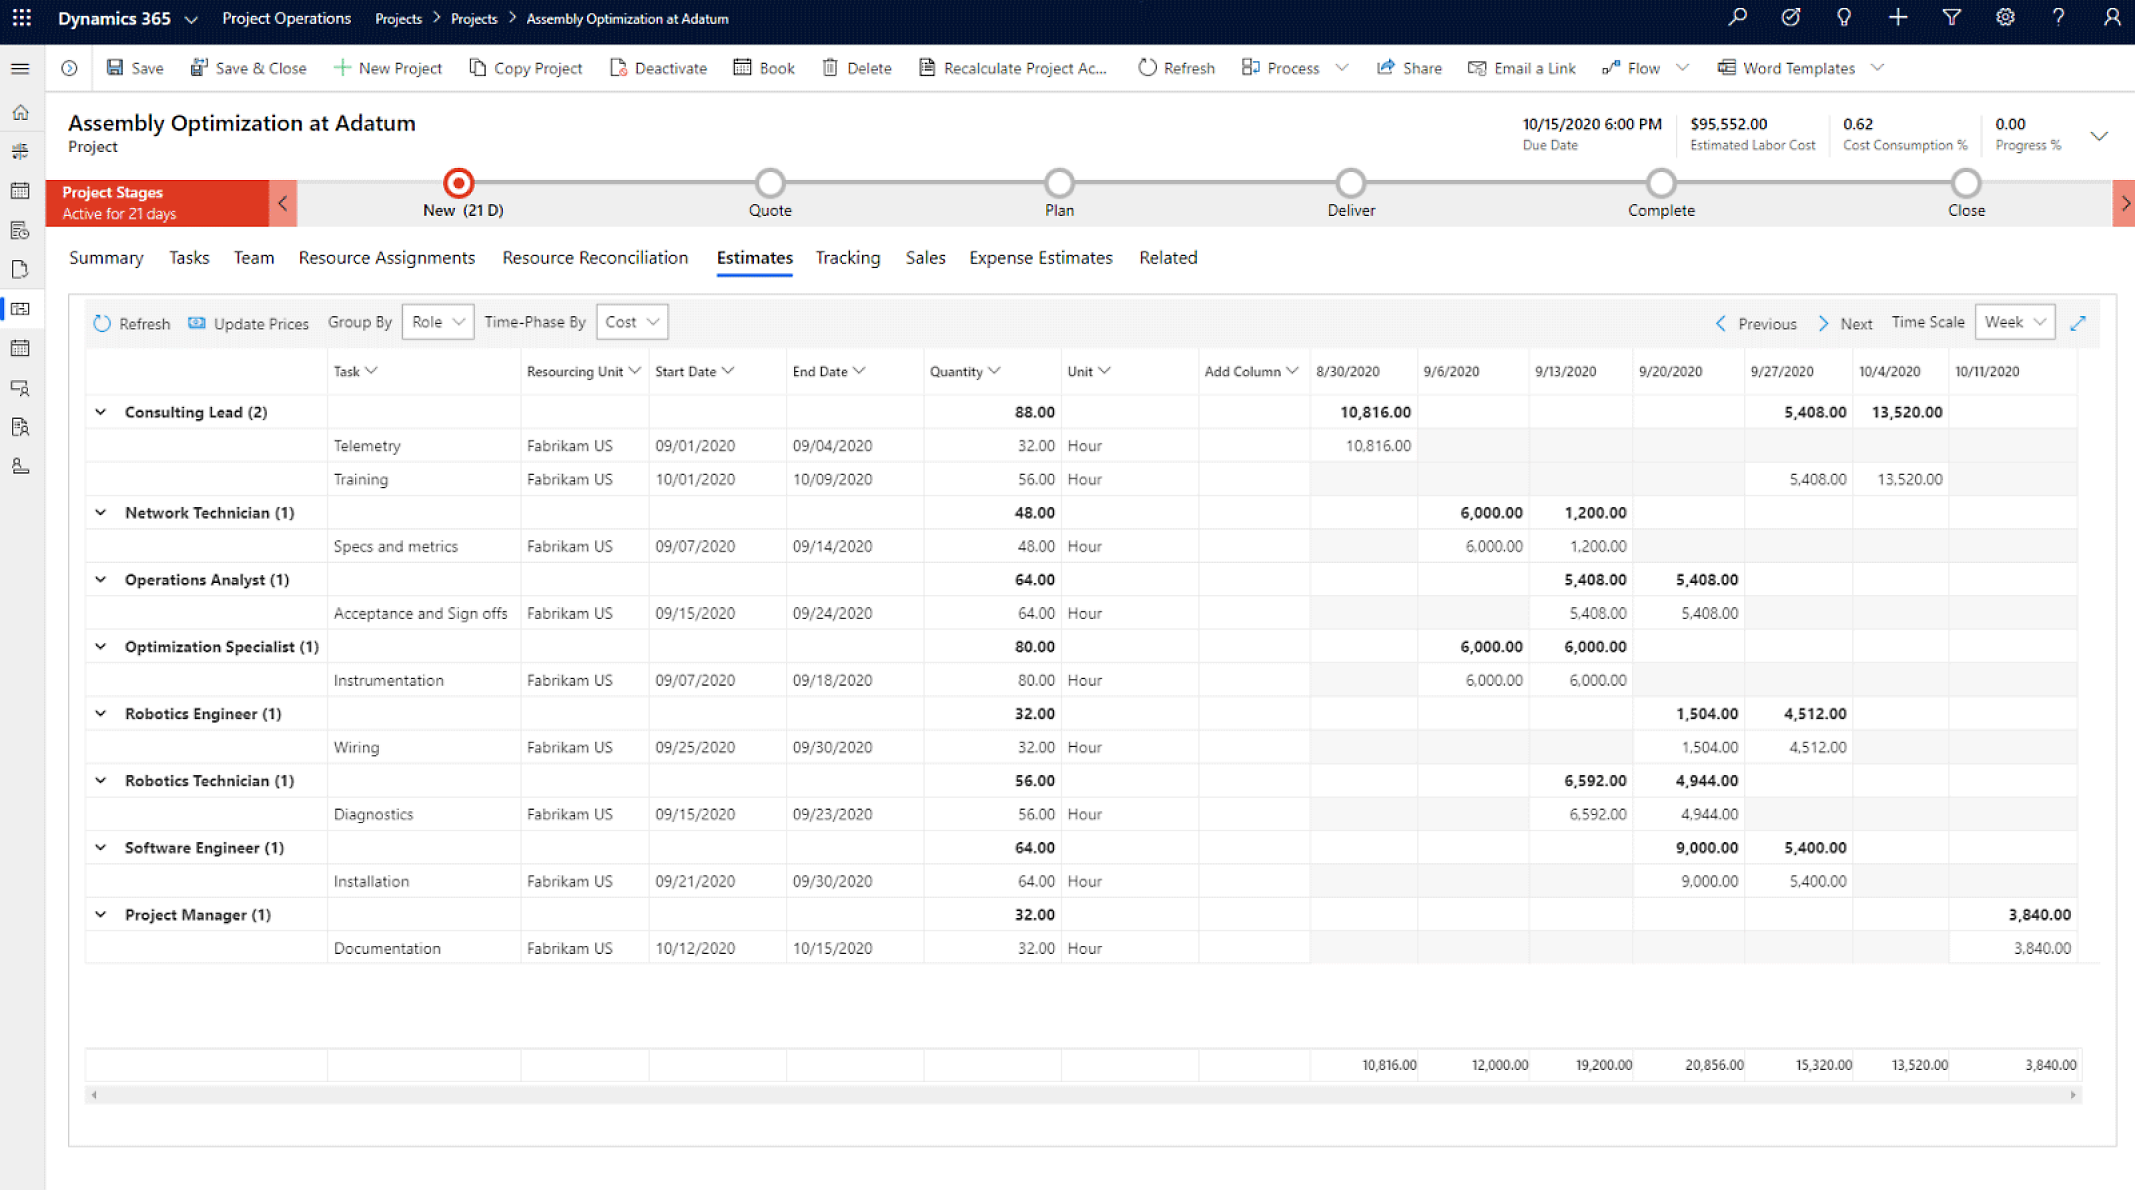 A screenshot of the review budget page within the dynamics 365 project operations application.